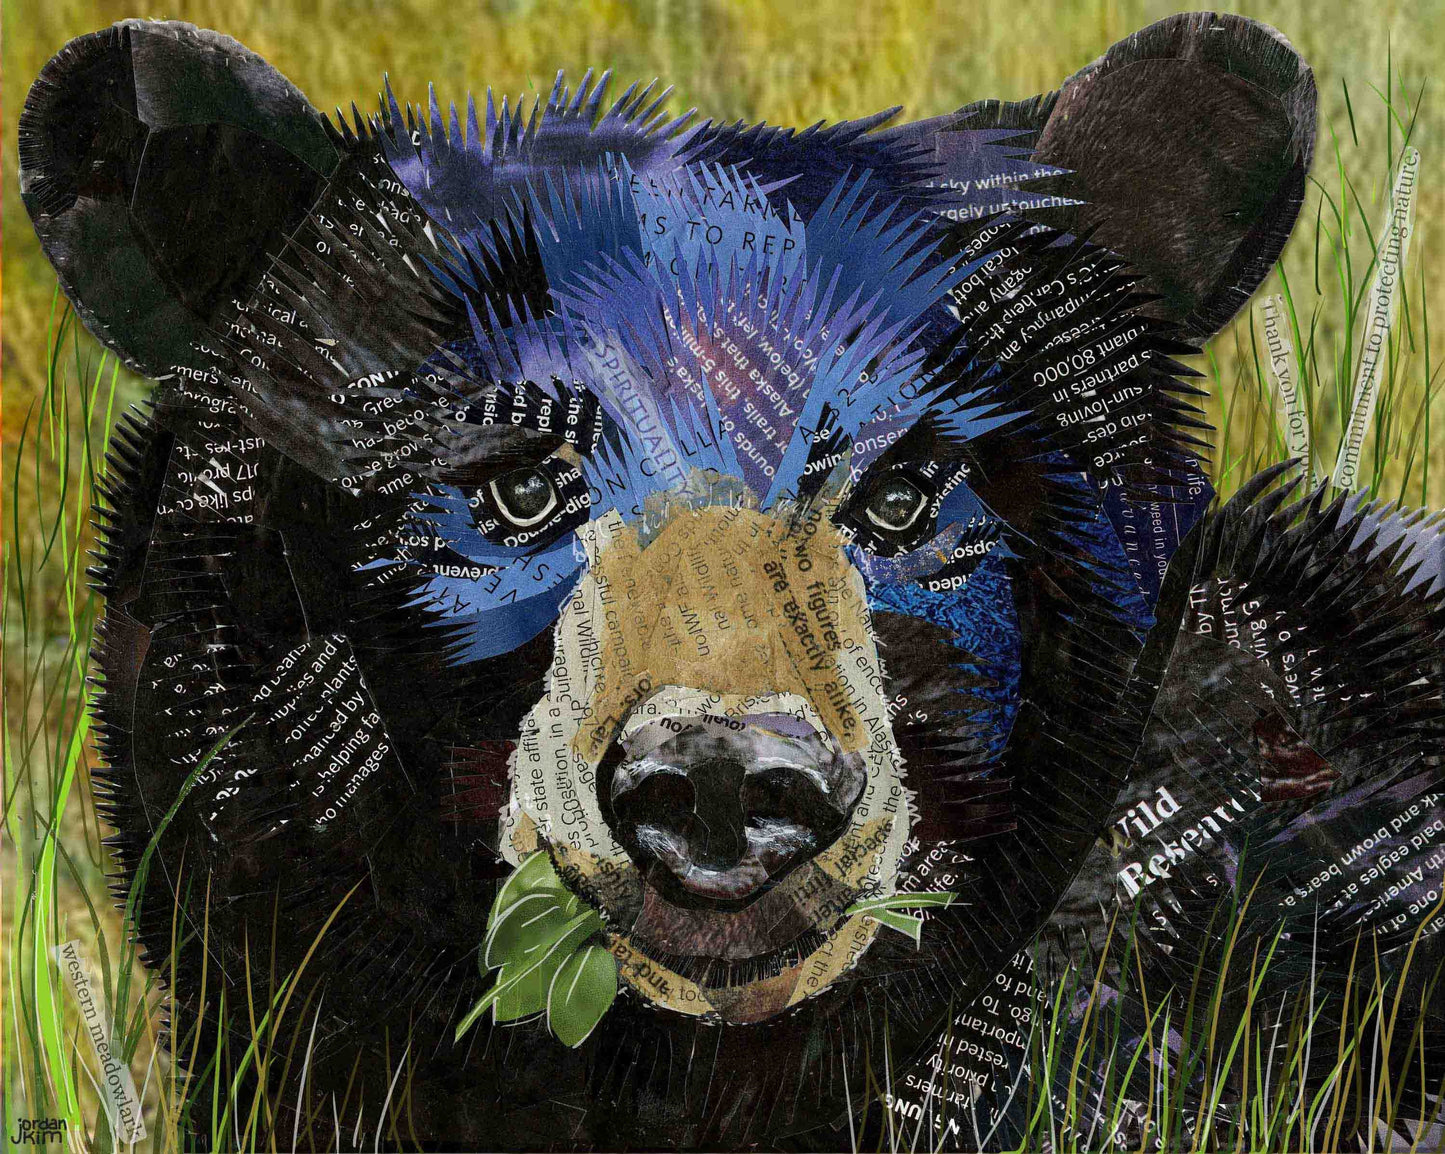 Greeting Card of a Paper Collage of a Black Bear Eating Grass - Inspirational - Blank Inside